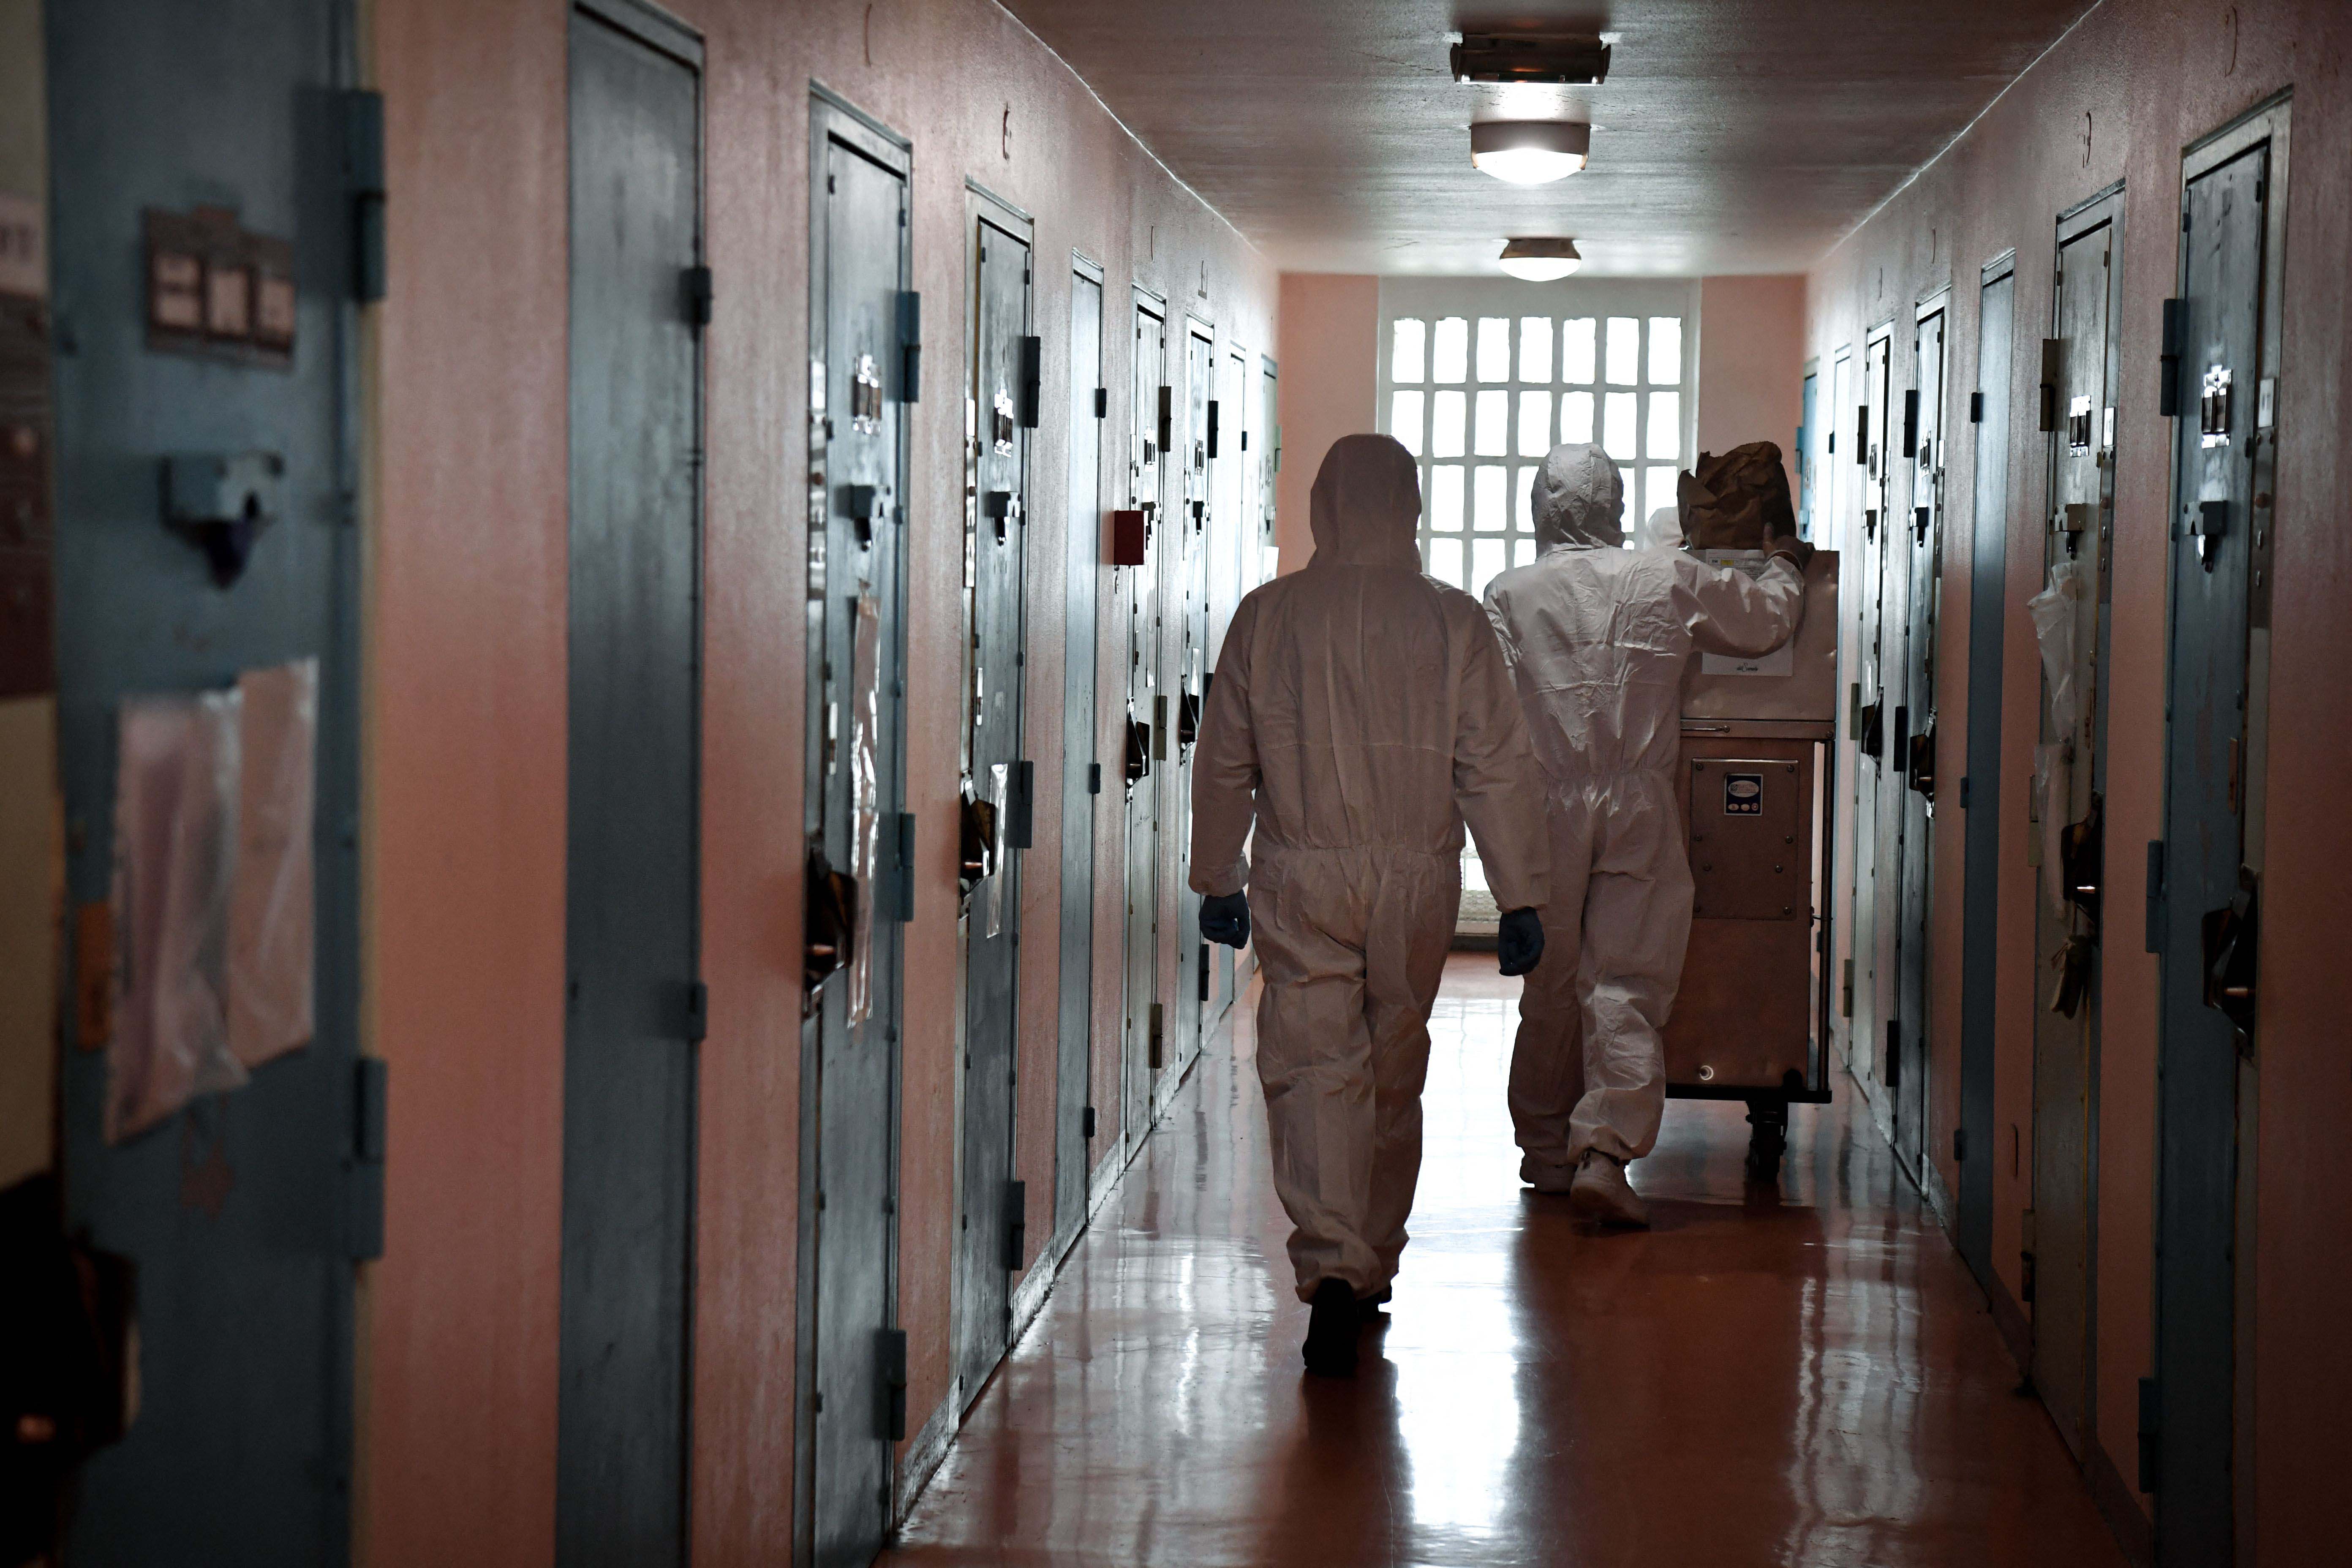 Two people in PPE walk down a prison corridor